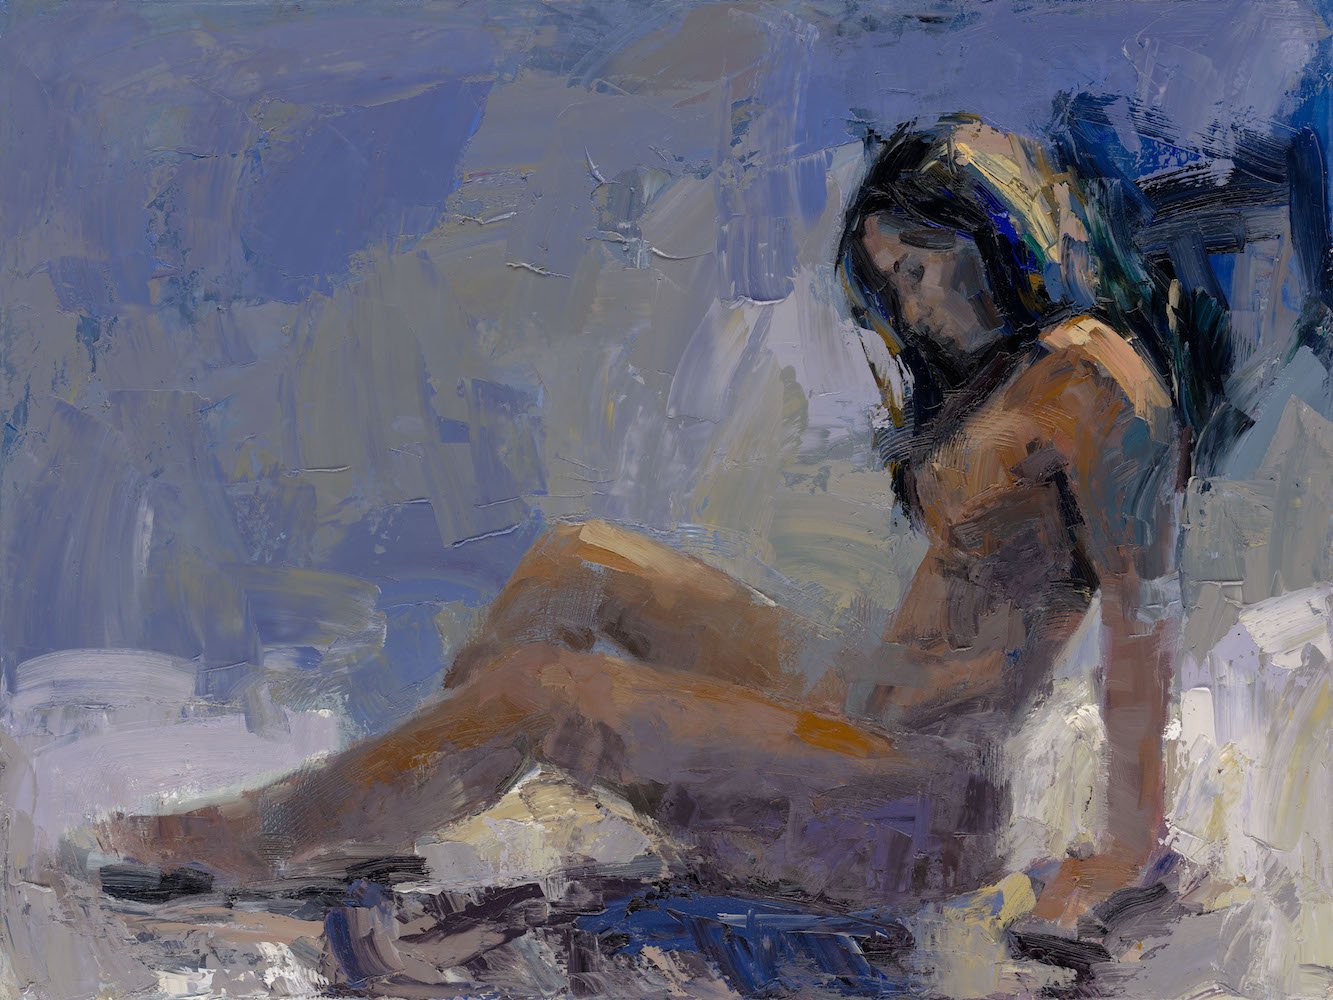 ibestudio Art 30x40 / Figurative / Limited Edition Giclee Print On Canvas Seated Nude - Painting - Limited Edition Giclee on canvas